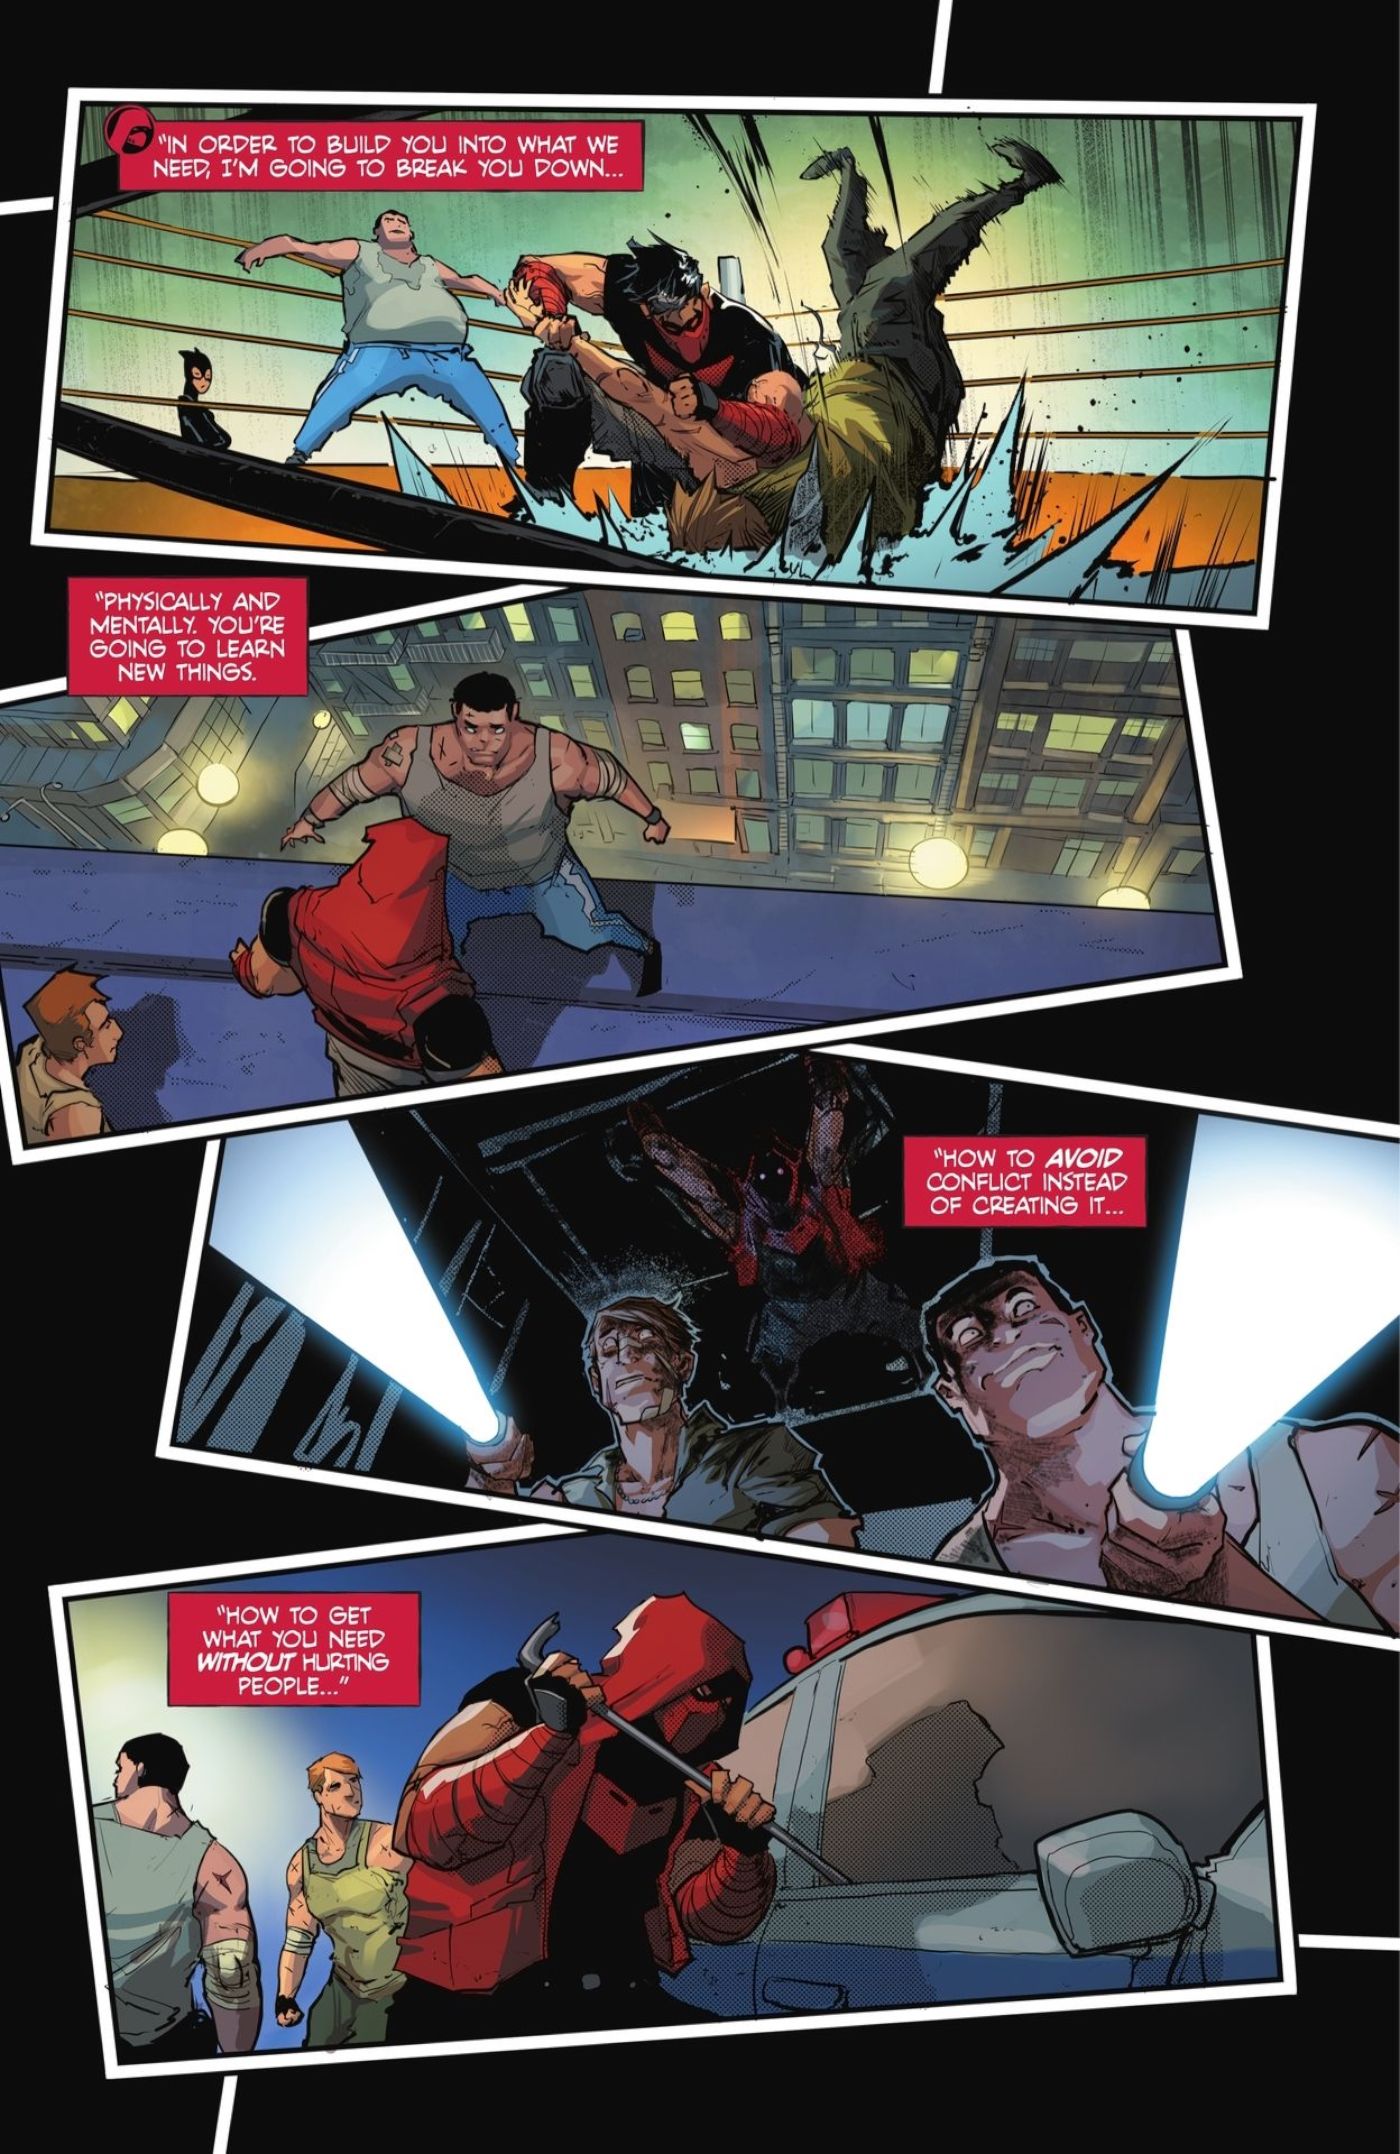 Red Hood is Training Criminals